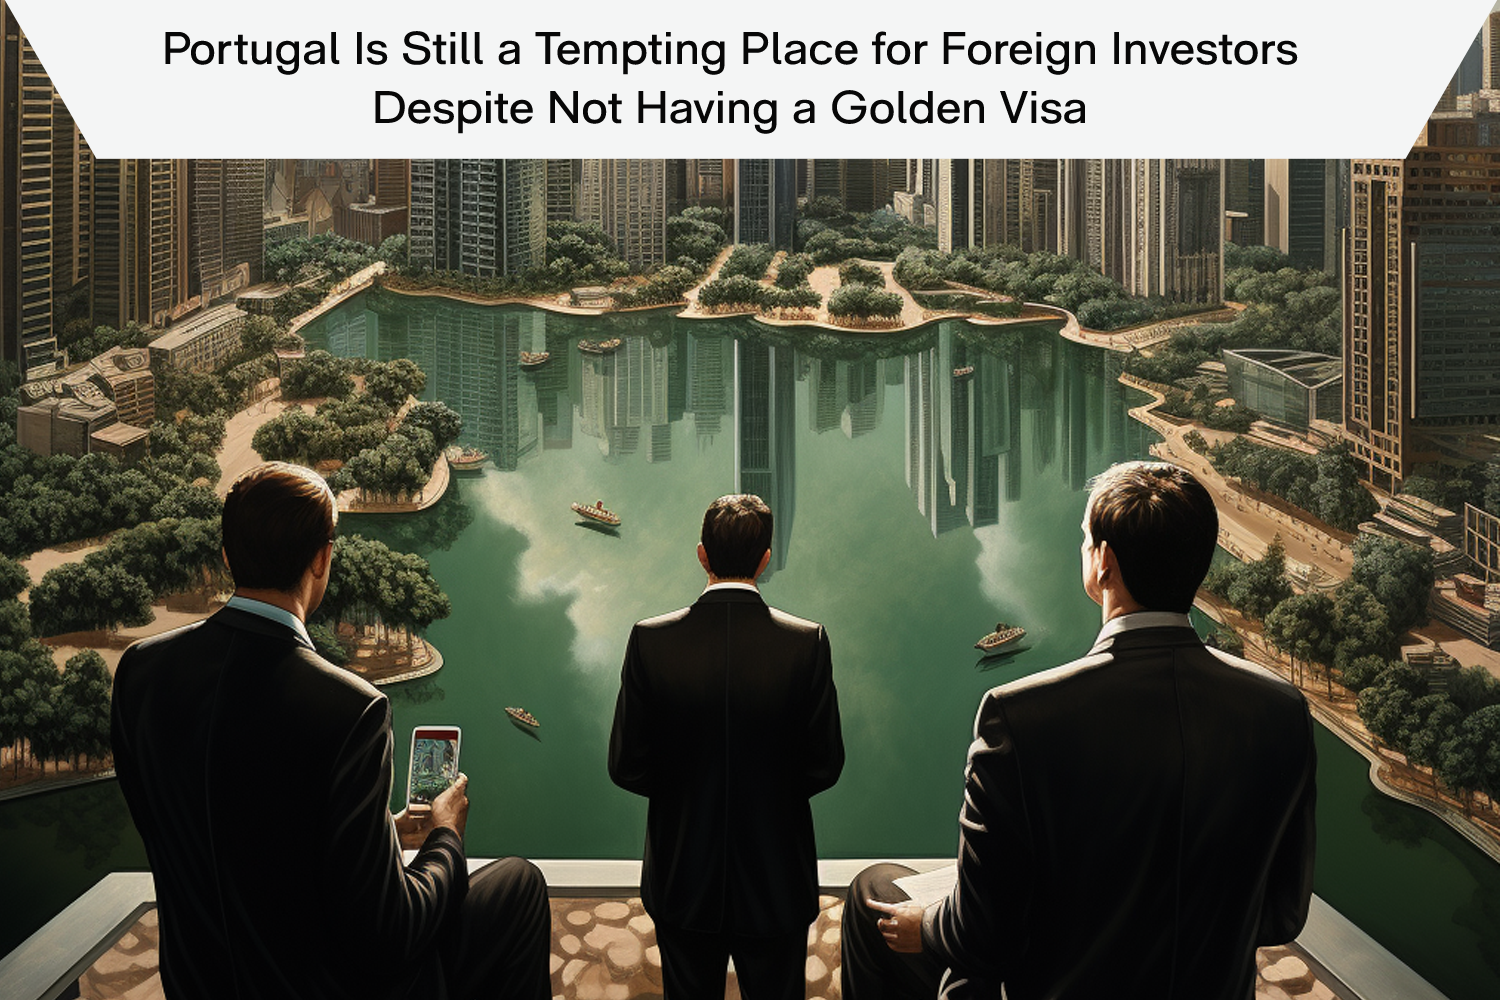 Portugal Is Still a Tempting Place for Foreign Investors Despite Not Having a Golden Visa.